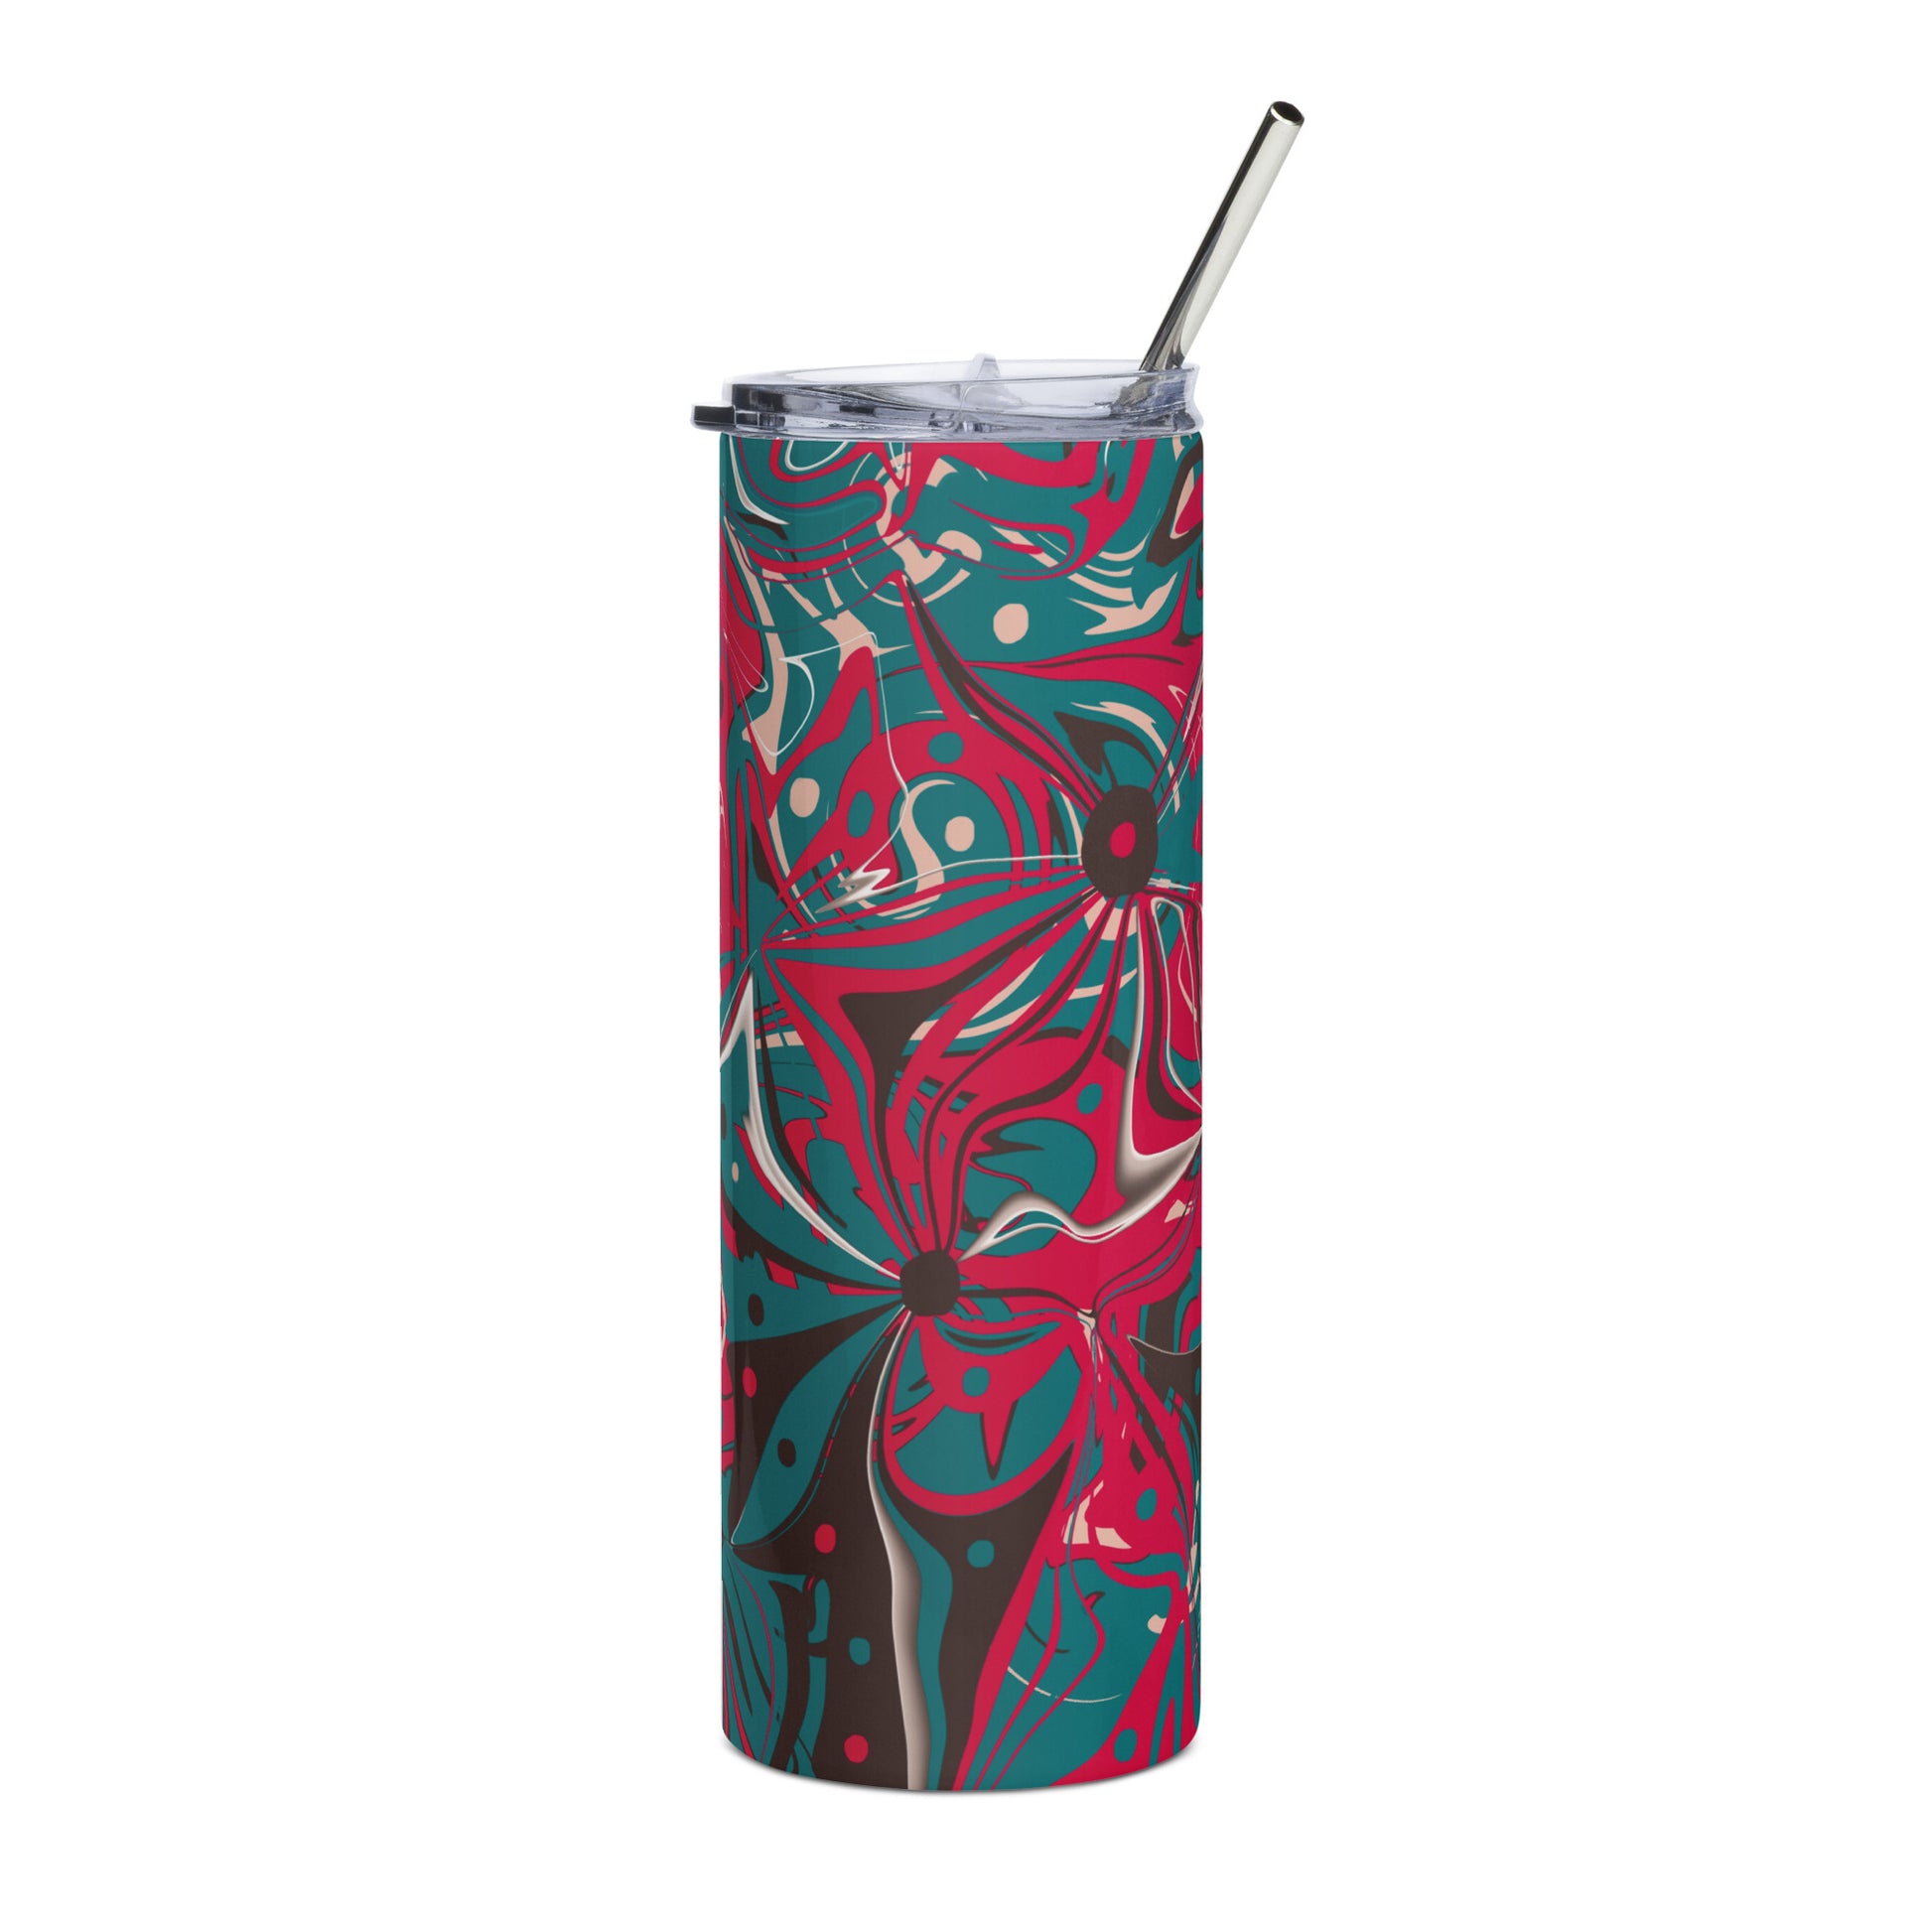 Spangled Stainless steel tumbler by Emmy Spoon